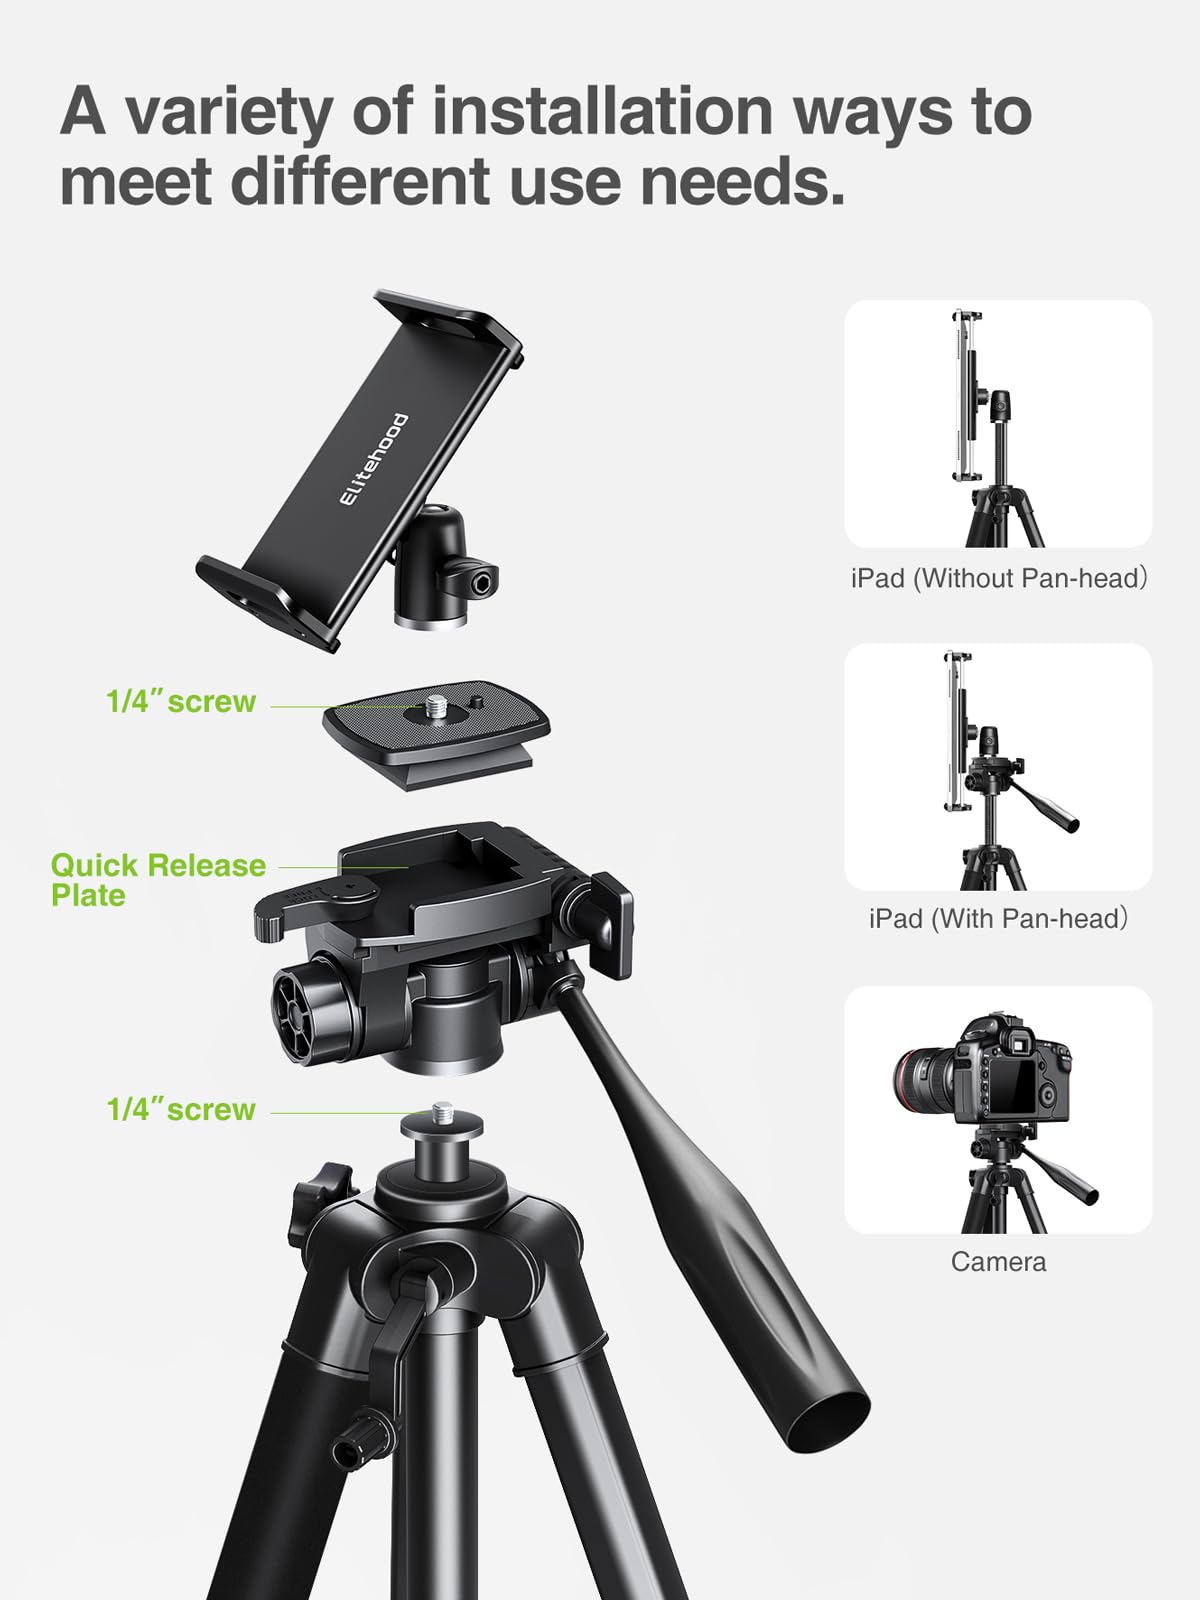 Elitehood 68" Heavy Duty iPad Tripod, Ultra-Stable Camera Tripod for iPad Pro 12.9, iPad Tripod Stand Mount for Video Recording/Photography, Compatible with 4.7-13inch Tablet/iPad Pro/Webcam/DSLR